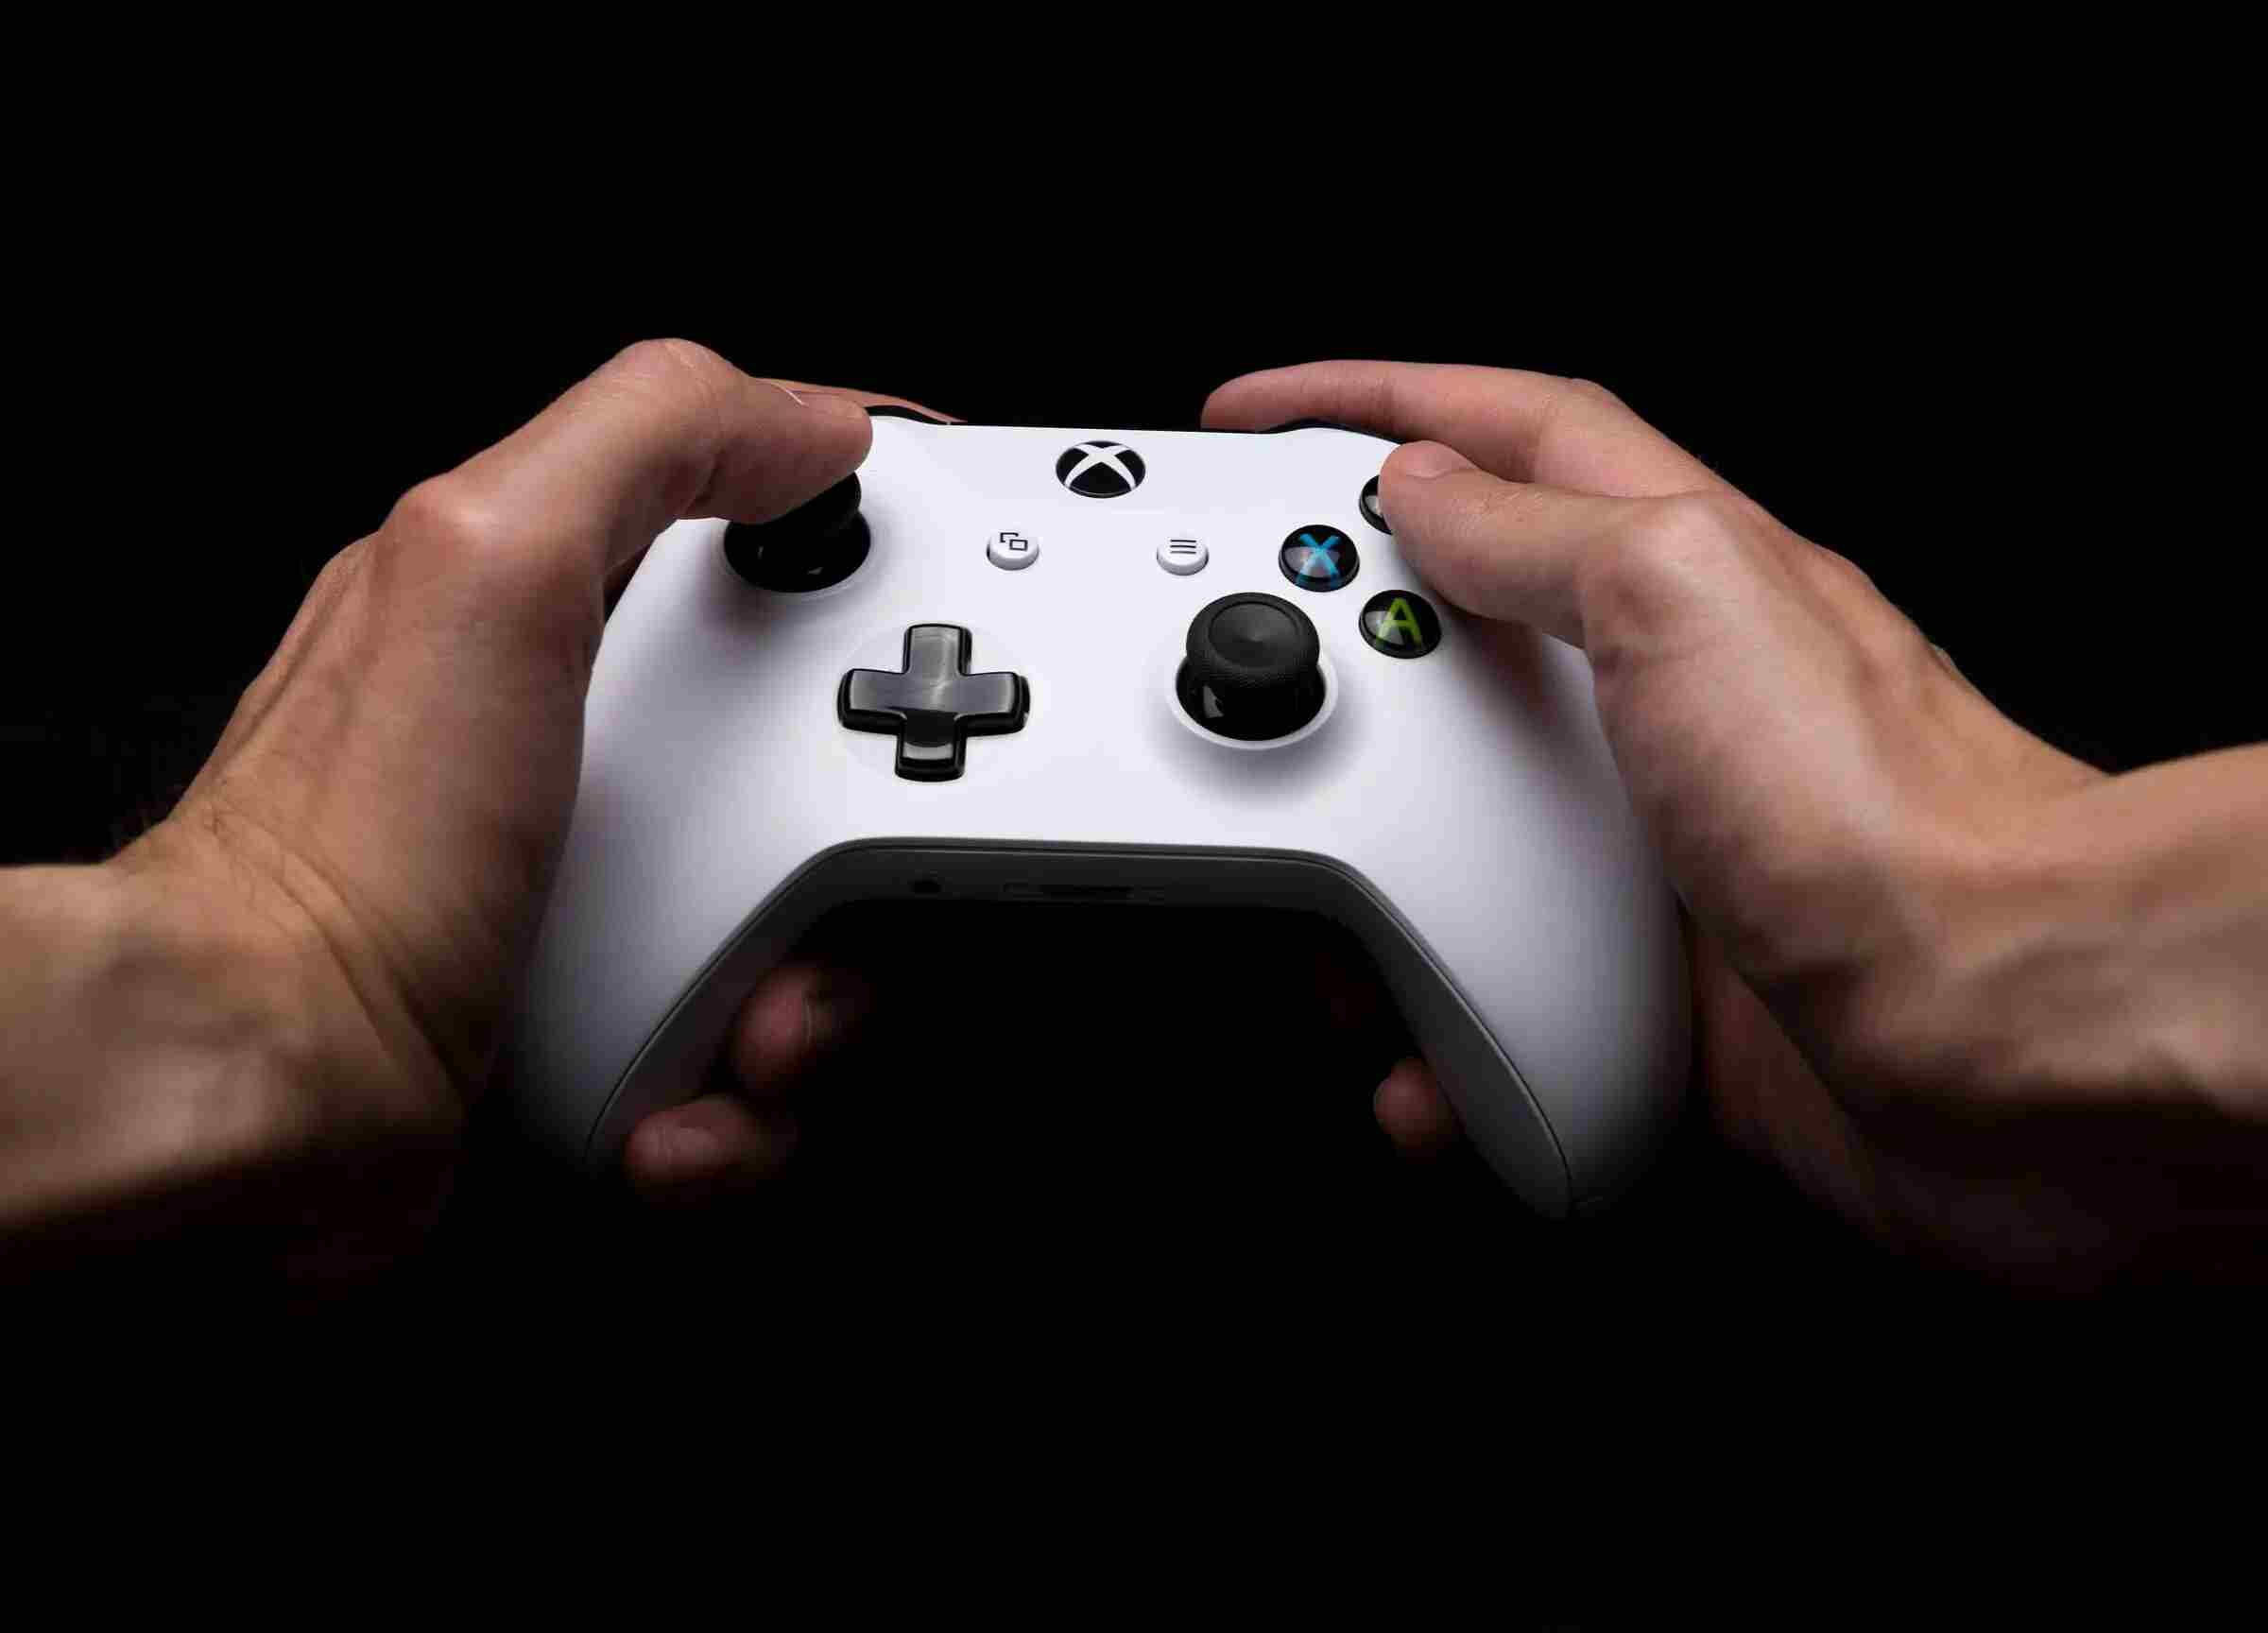 How to connect Xbox One controller to iPhone